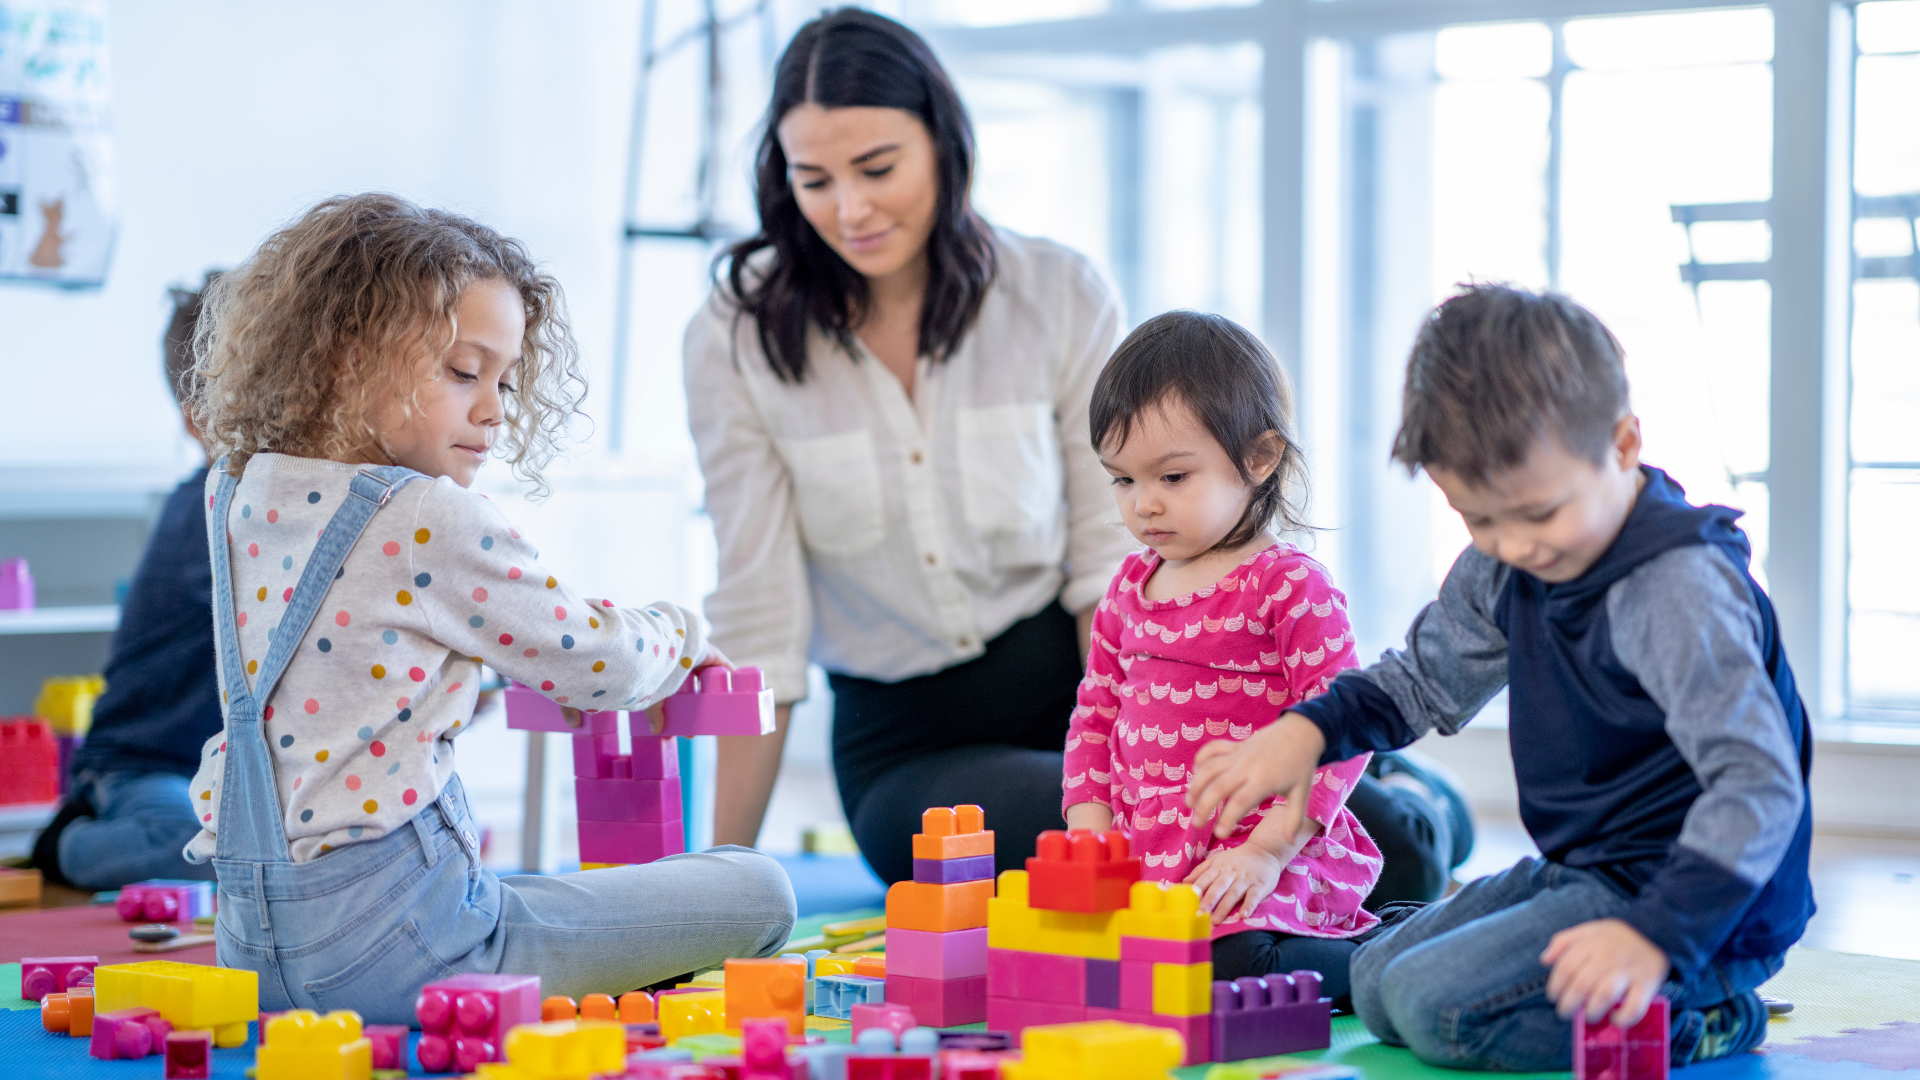 A child care worker watches over a group of young children playing with blocks